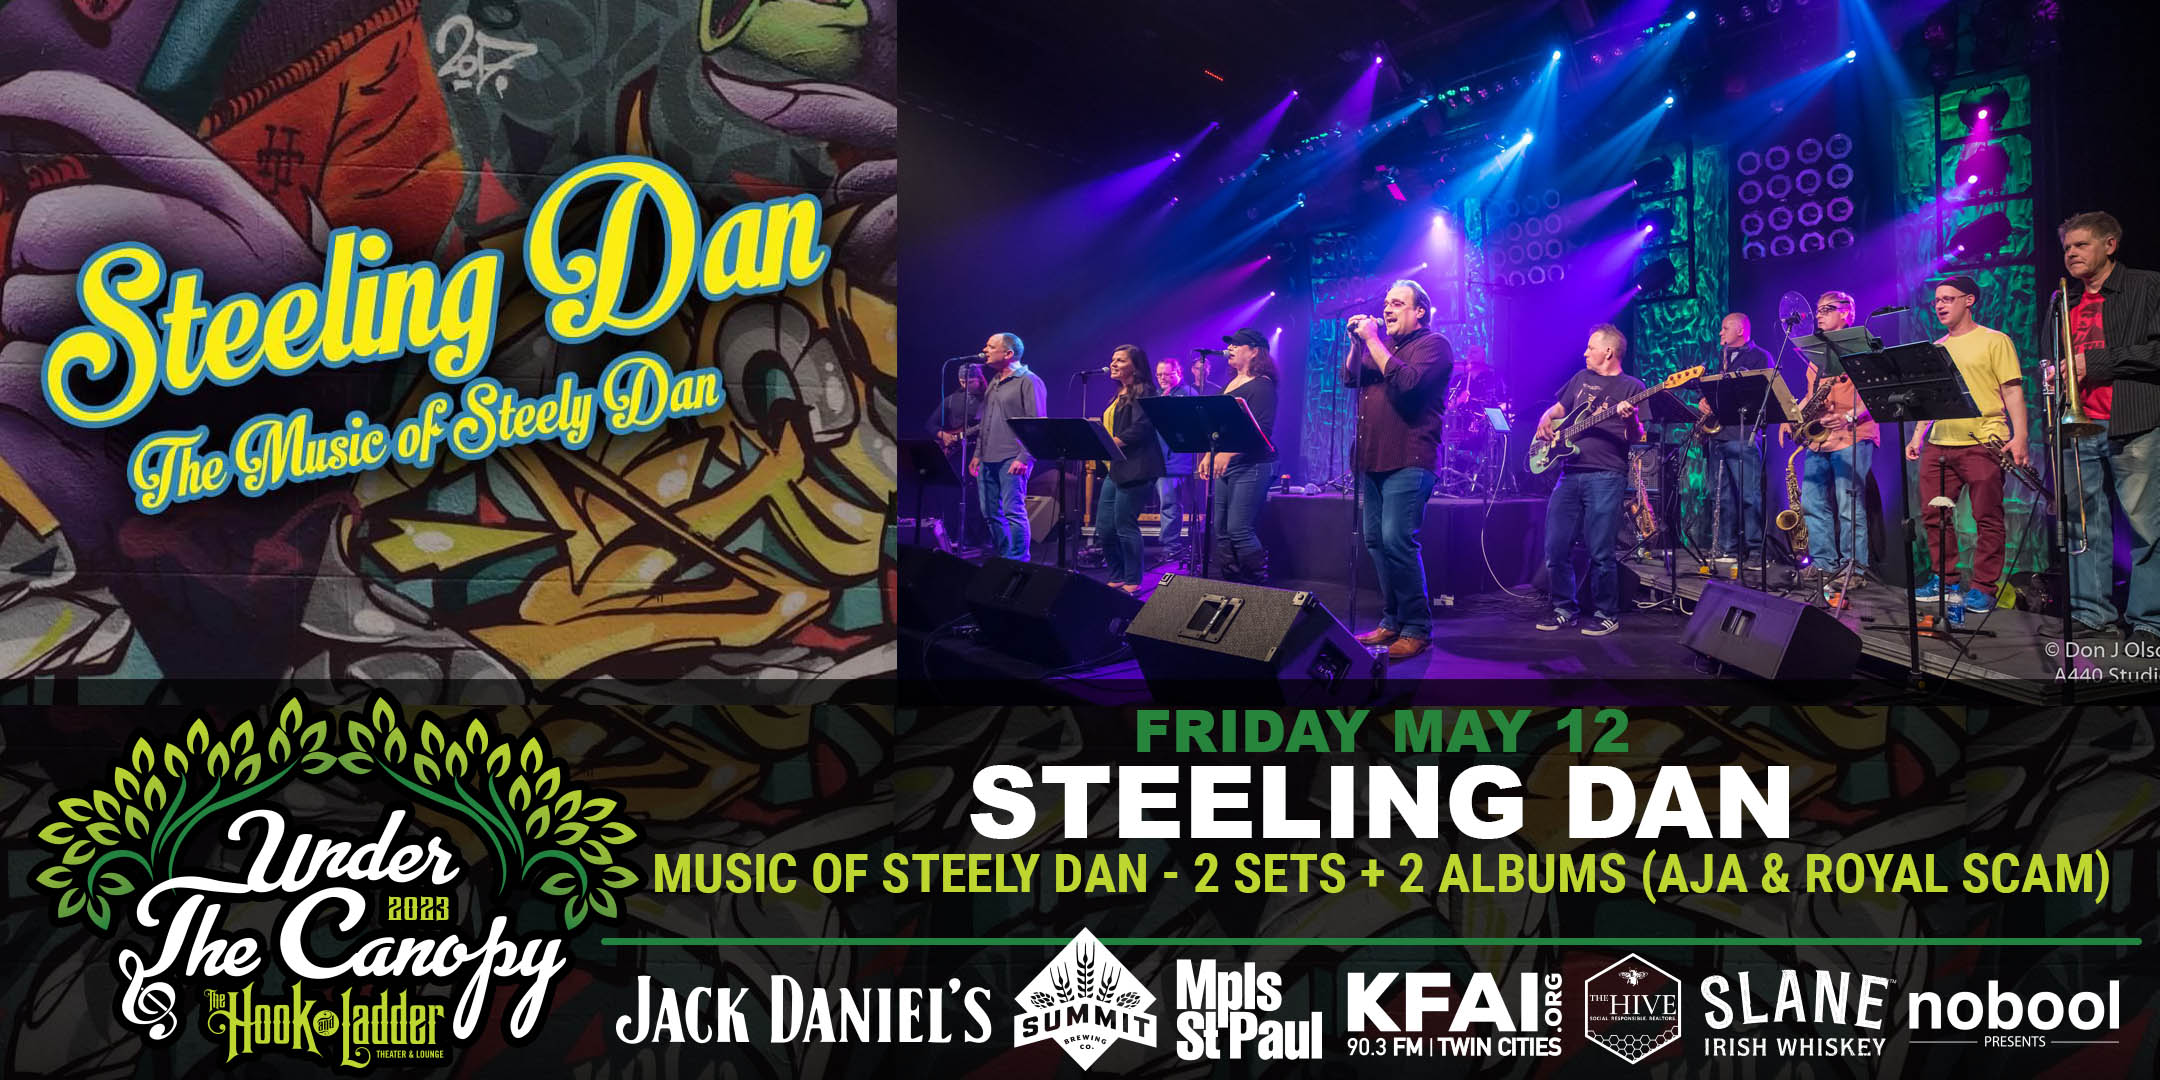 Steeling Dan The Music Of Steely Dan 2 Sets + 2 Albums ('Aja' & 'Royal Scam') Friday, May 12 Under The Canopy at The Hook and Ladder Theater "An Urban Outdoor Summer Concert Series" Doors 6:00pm :: Music 7:00pm :: 21+ Reserved Seats: $35 GA: $20 ADV / $25 DOS